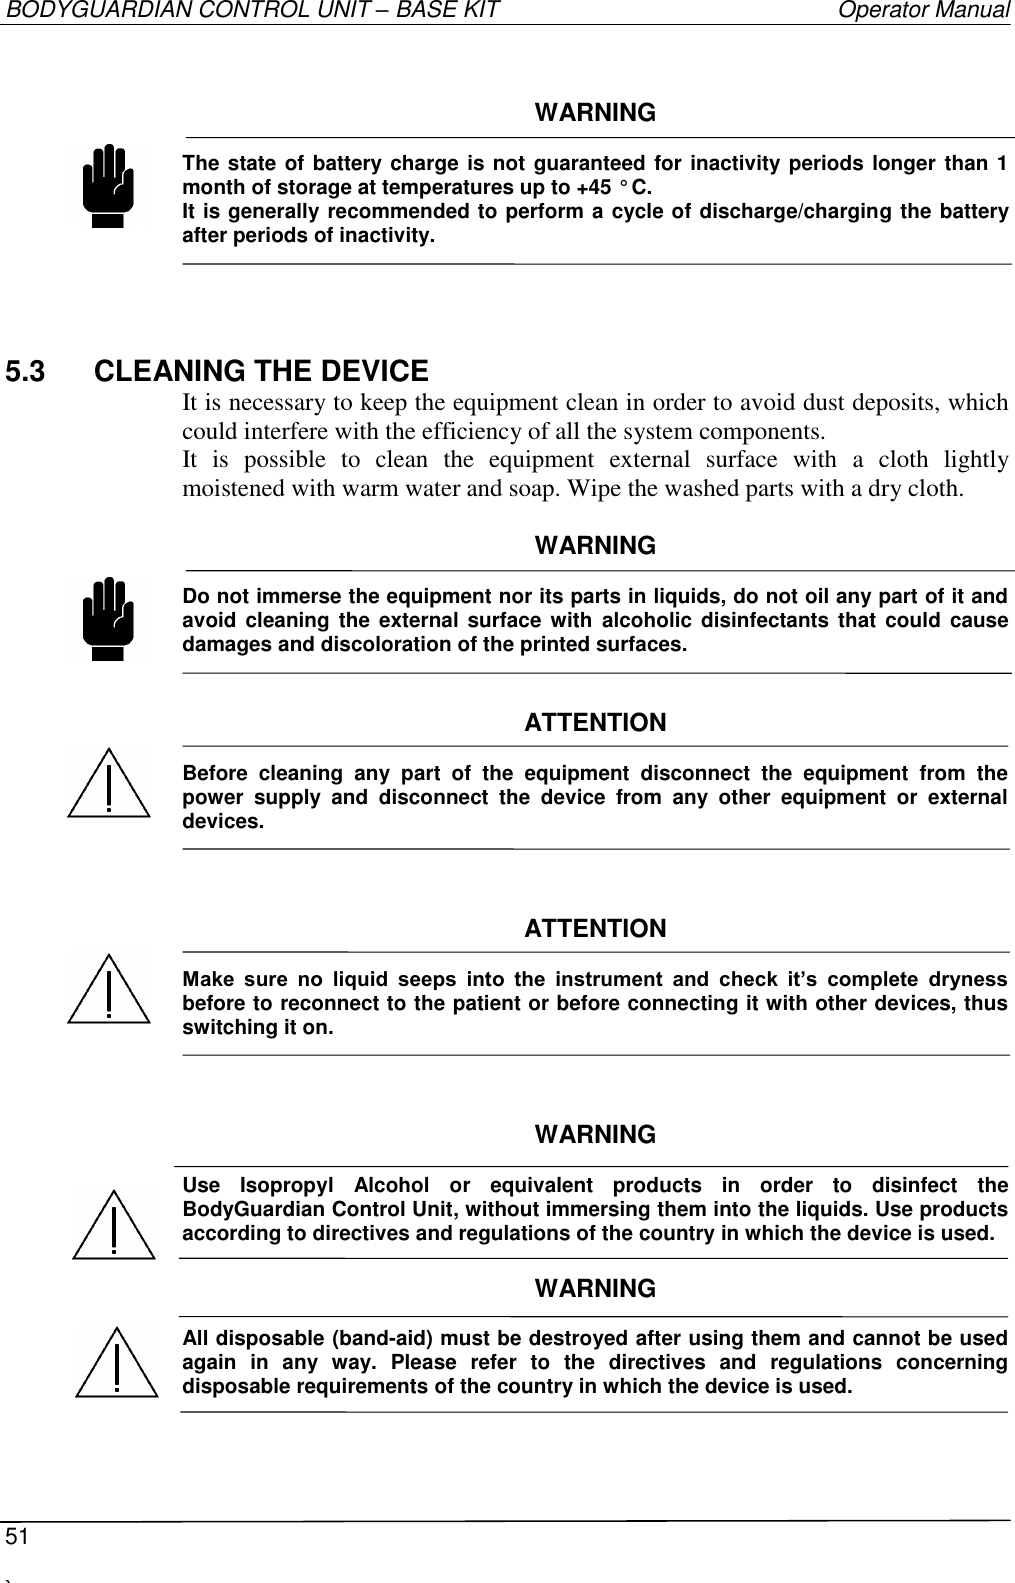 BODYGUARDIAN CONTROL UNIT – BASE KIT   Operator Manual  51  `    WARNING  The state of battery charge is not guaranteed for inactivity periods longer than 1 month of storage at temperatures up to +45 ° C. It is generally recommended to perform a cycle of discharge/charging the battery after periods of inactivity.  5.3  CLEANING THE DEVICE It is necessary to keep the equipment clean in order to avoid dust deposits, which could interfere with the efficiency of all the system components. It  is  possible  to  clean  the  equipment  external  surface  with  a  cloth  lightly moistened with warm water and soap. Wipe the washed parts with a dry cloth.  WARNING  Do not immerse the equipment nor its parts in liquids, do not oil any part of it and avoid  cleaning  the  external  surface  with  alcoholic  disinfectants that  could cause damages and discoloration of the printed surfaces.   ATTENTION  Before  cleaning  any  part  of  the  equipment  disconnect  the  equipment  from  the power  supply  and  disconnect  the  device  from  any  other  equipment  or  external devices.    ATTENTION  Make  sure  no  liquid  seeps  into  the  instrument  and  check  it’s  complete  dryness before to reconnect to the patient or before connecting it with other devices, thus switching it on.    WARNING  Use  Isopropyl  Alcohol  or  equivalent  products  in  order  to  disinfect  the BodyGuardian Control Unit, without immersing them into the liquids. Use products according to directives and regulations of the country in which the device is used.  WARNING  All disposable (band-aid) must be destroyed after using them and cannot be used again  in  any  way.  Please  refer  to  the  directives  and  regulations  concerning disposable requirements of the country in which the device is used.           